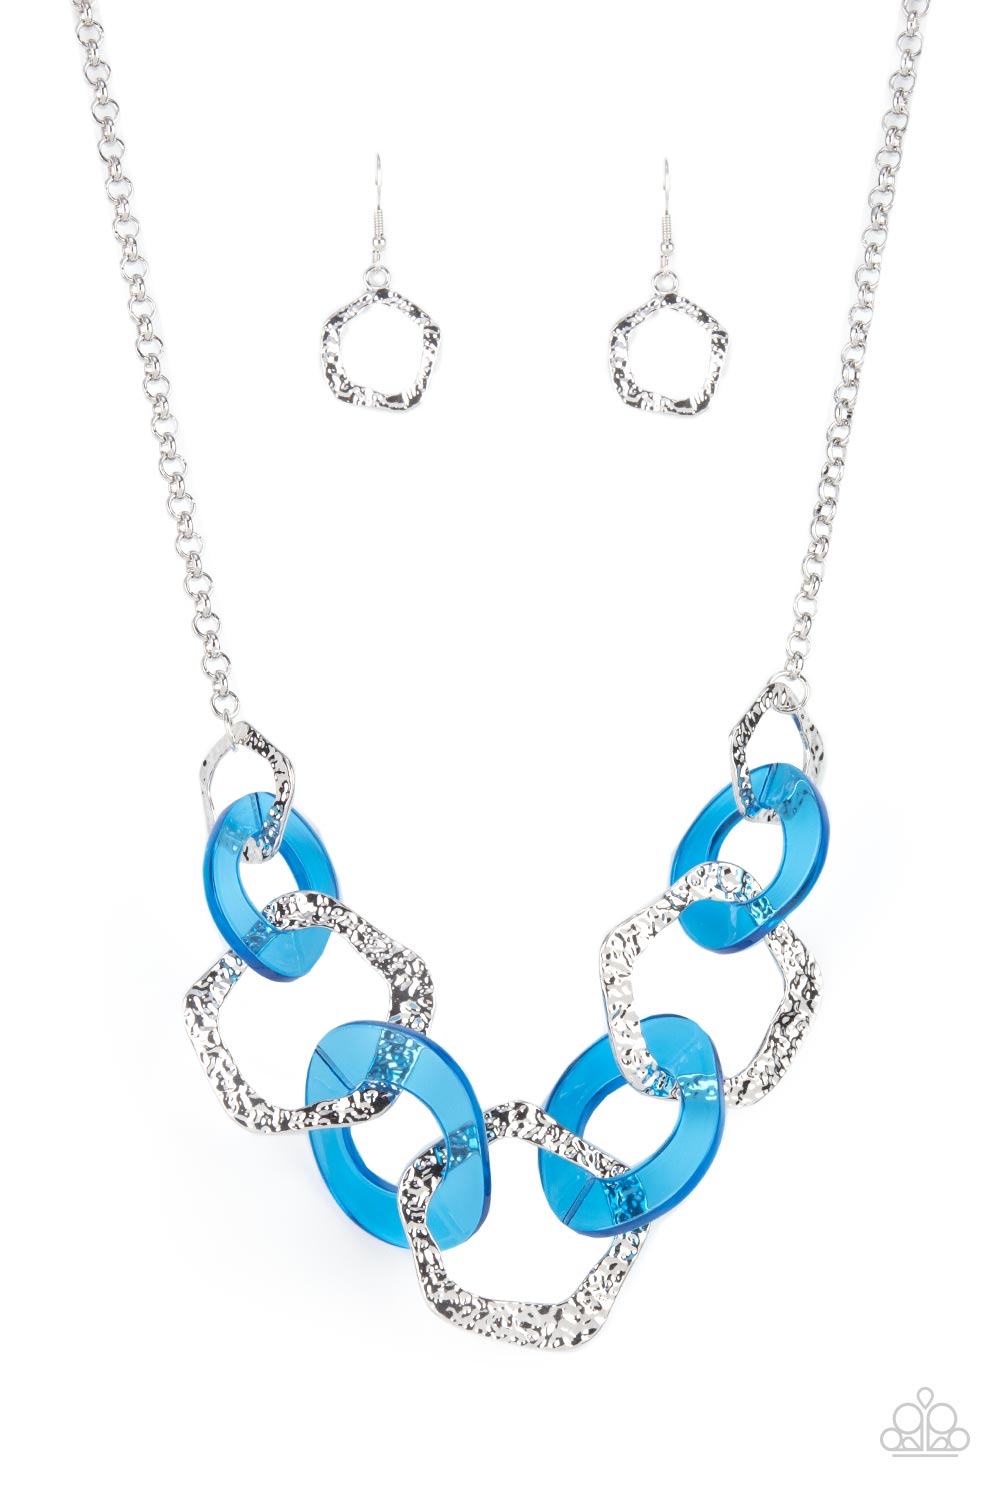 Urban Circus - Blue Acrylic Necklaces an asymmetrical assortment of neon blue acrylic rings and hammered silver hoops boldly interlock below the collar, creating an intense pop of color. Features an adjustable clasp closure.